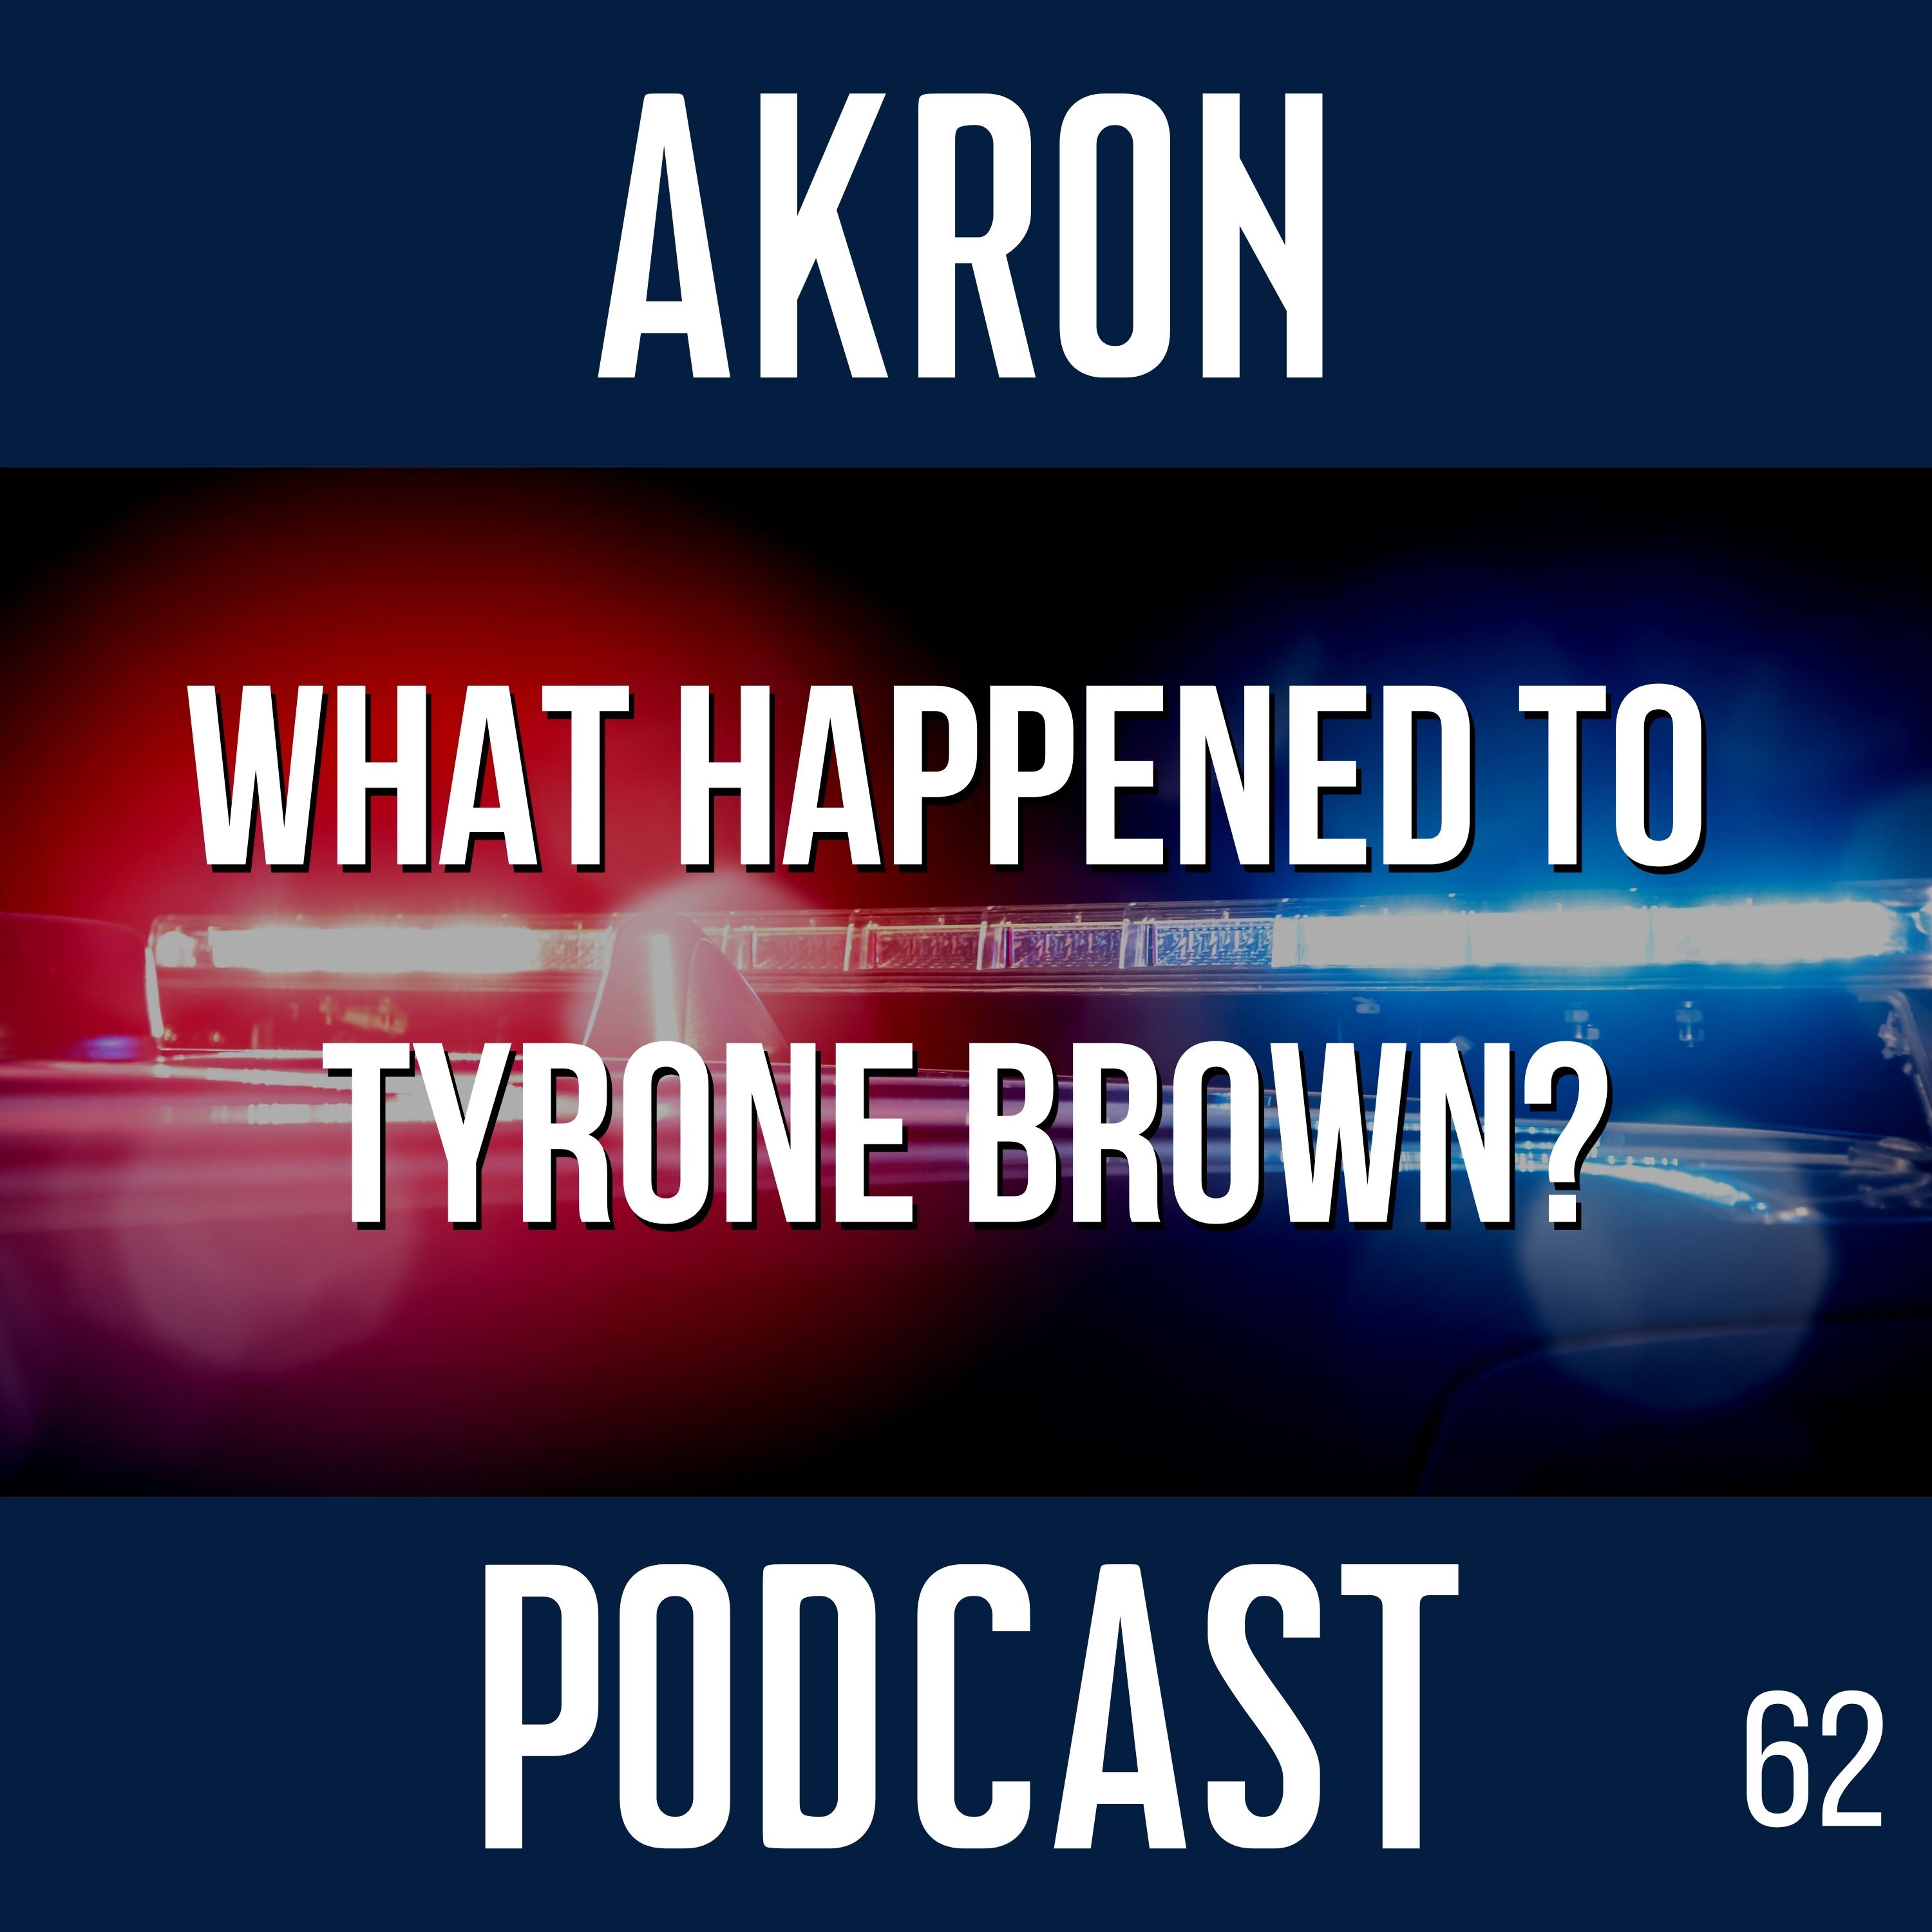 What Happened to Tyrone Brown?